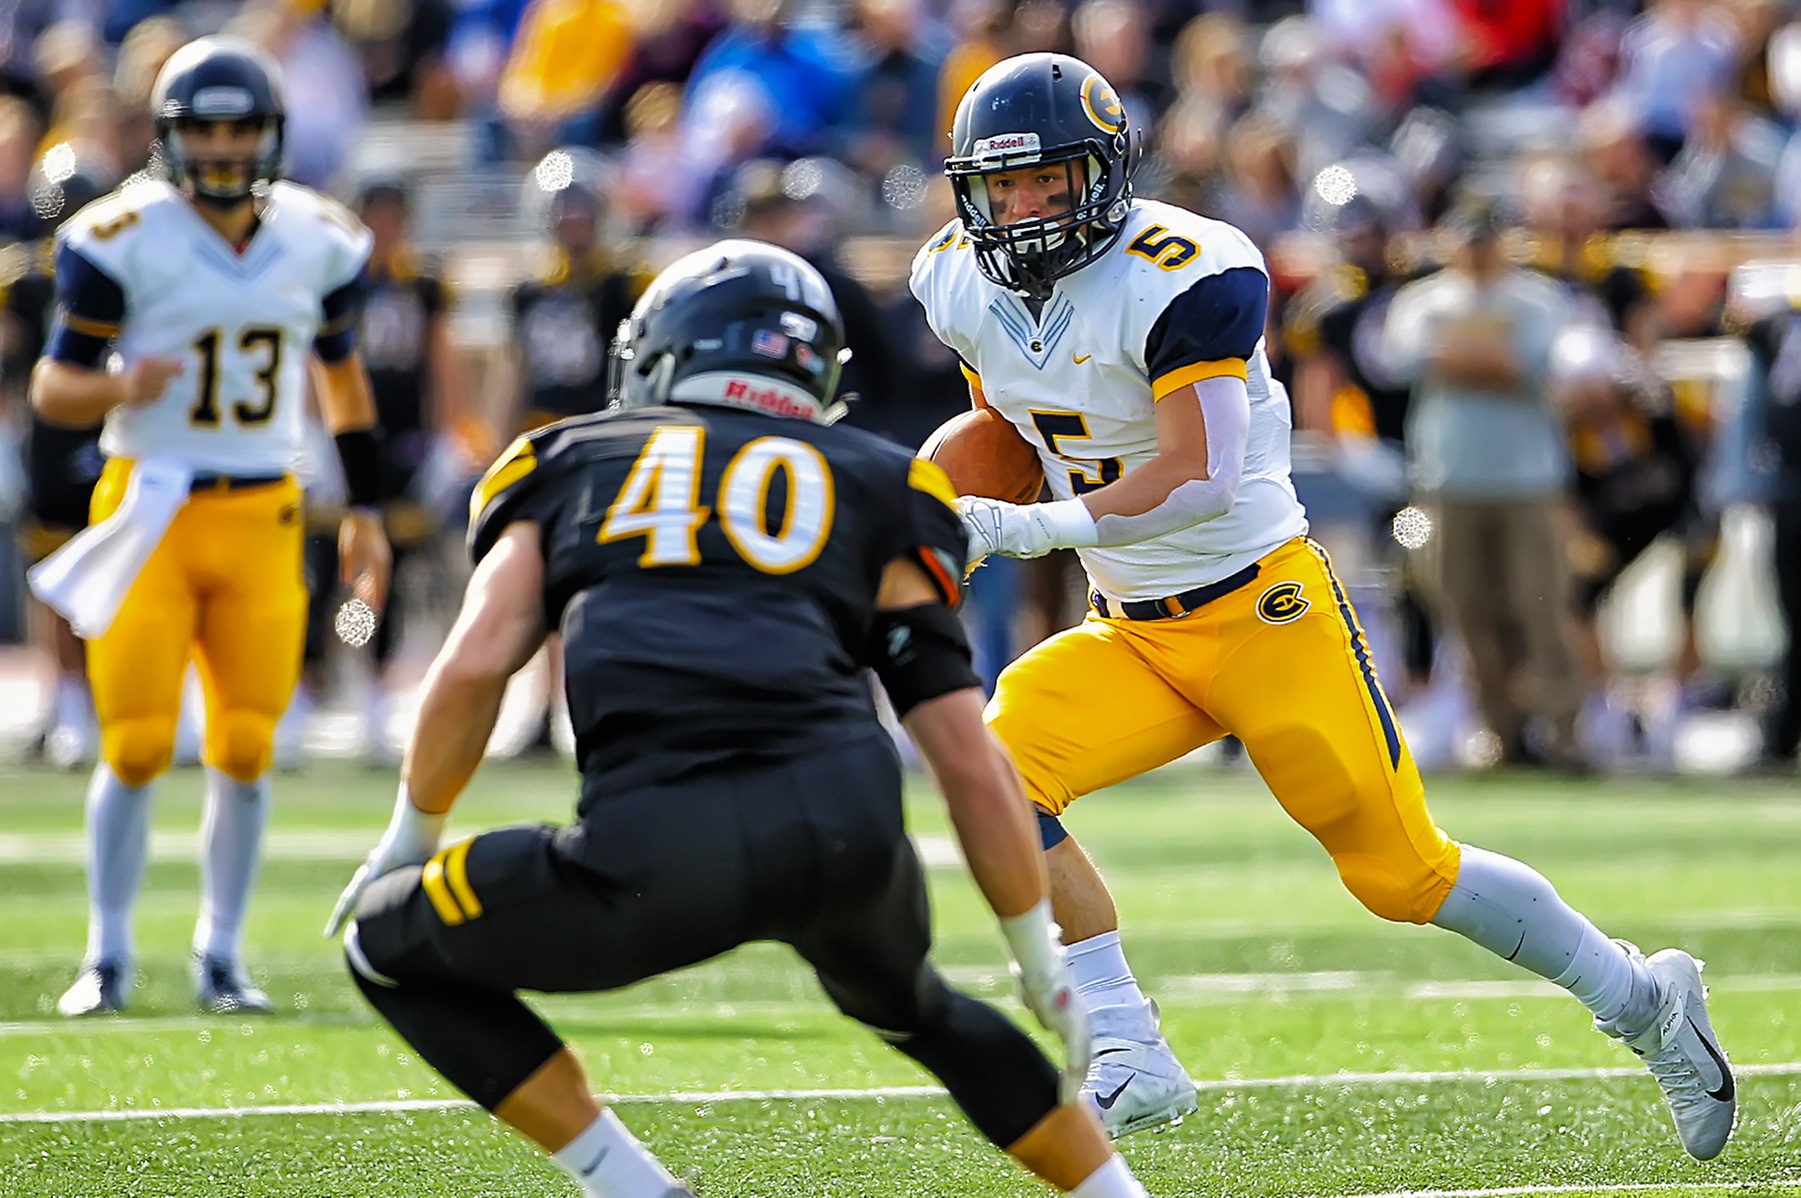 Blugolds fall to Titans